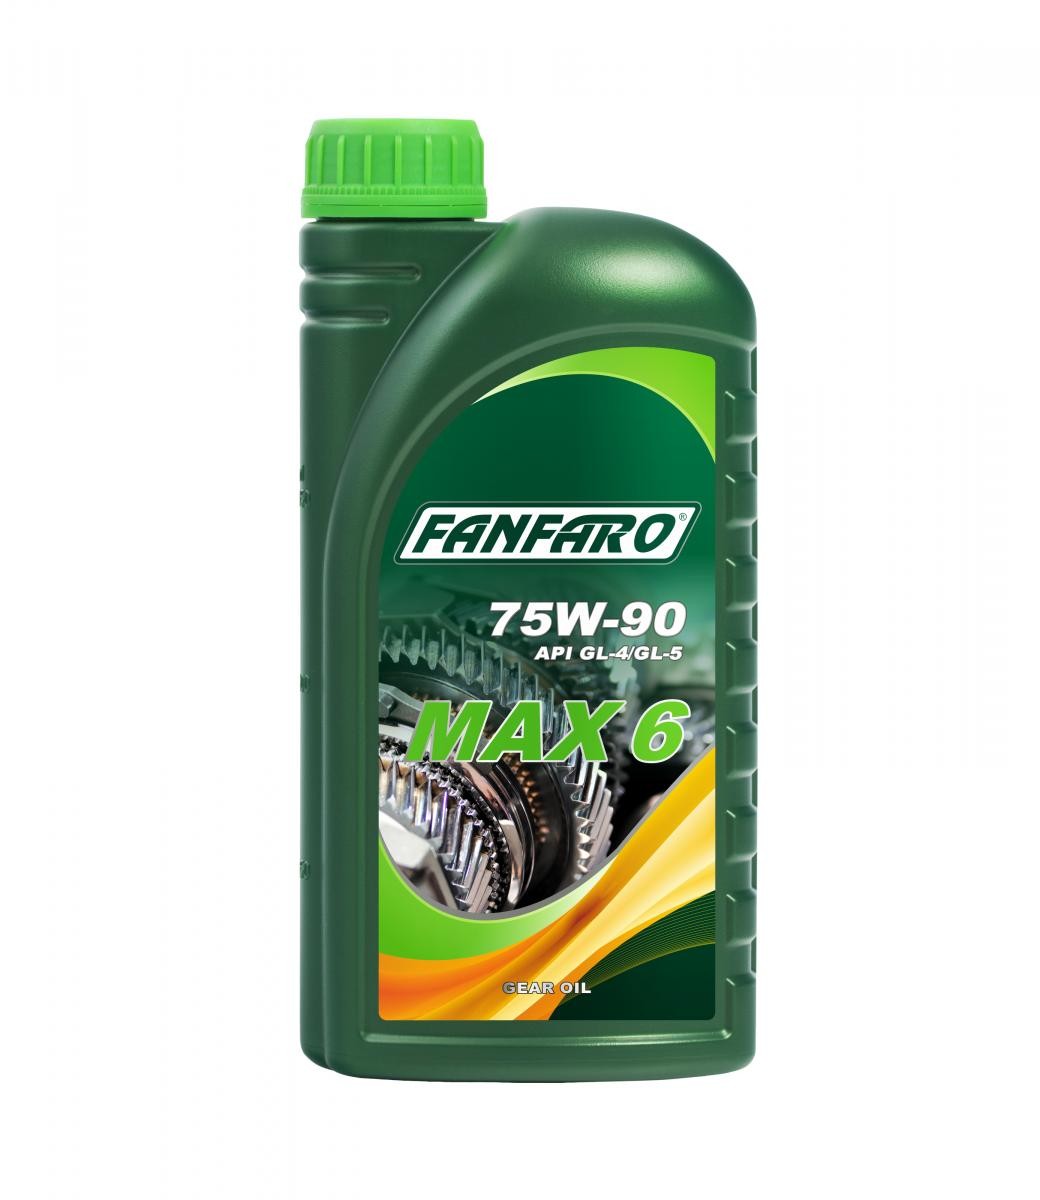 FANFARO FF8706-1 Axle Gear Oil NISSAN experience and price